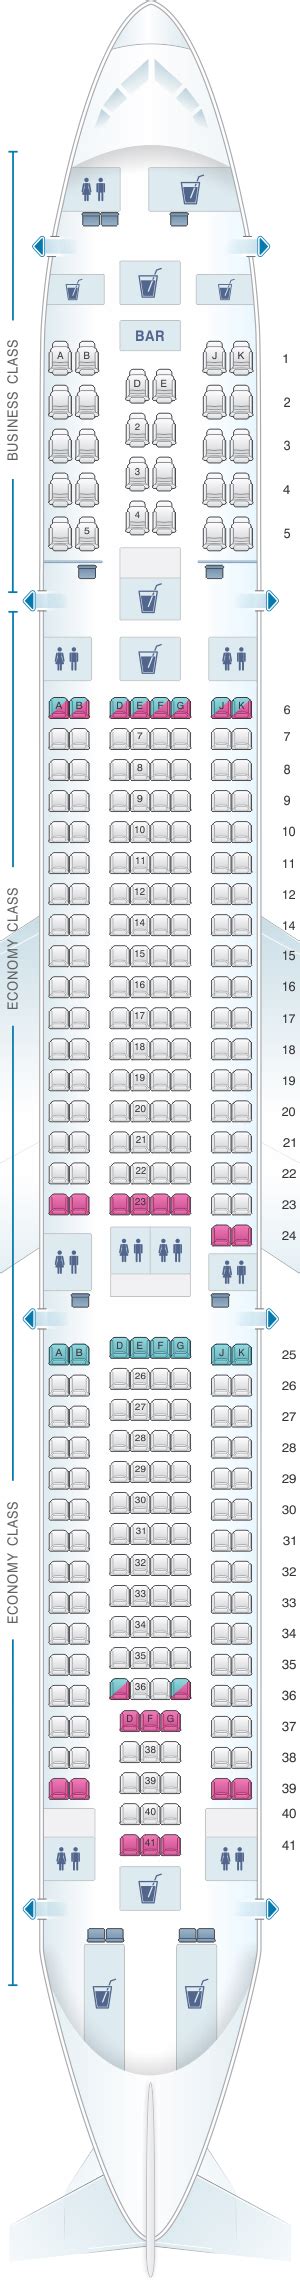 Klm 333 Seating Chart Reviews Of Chart